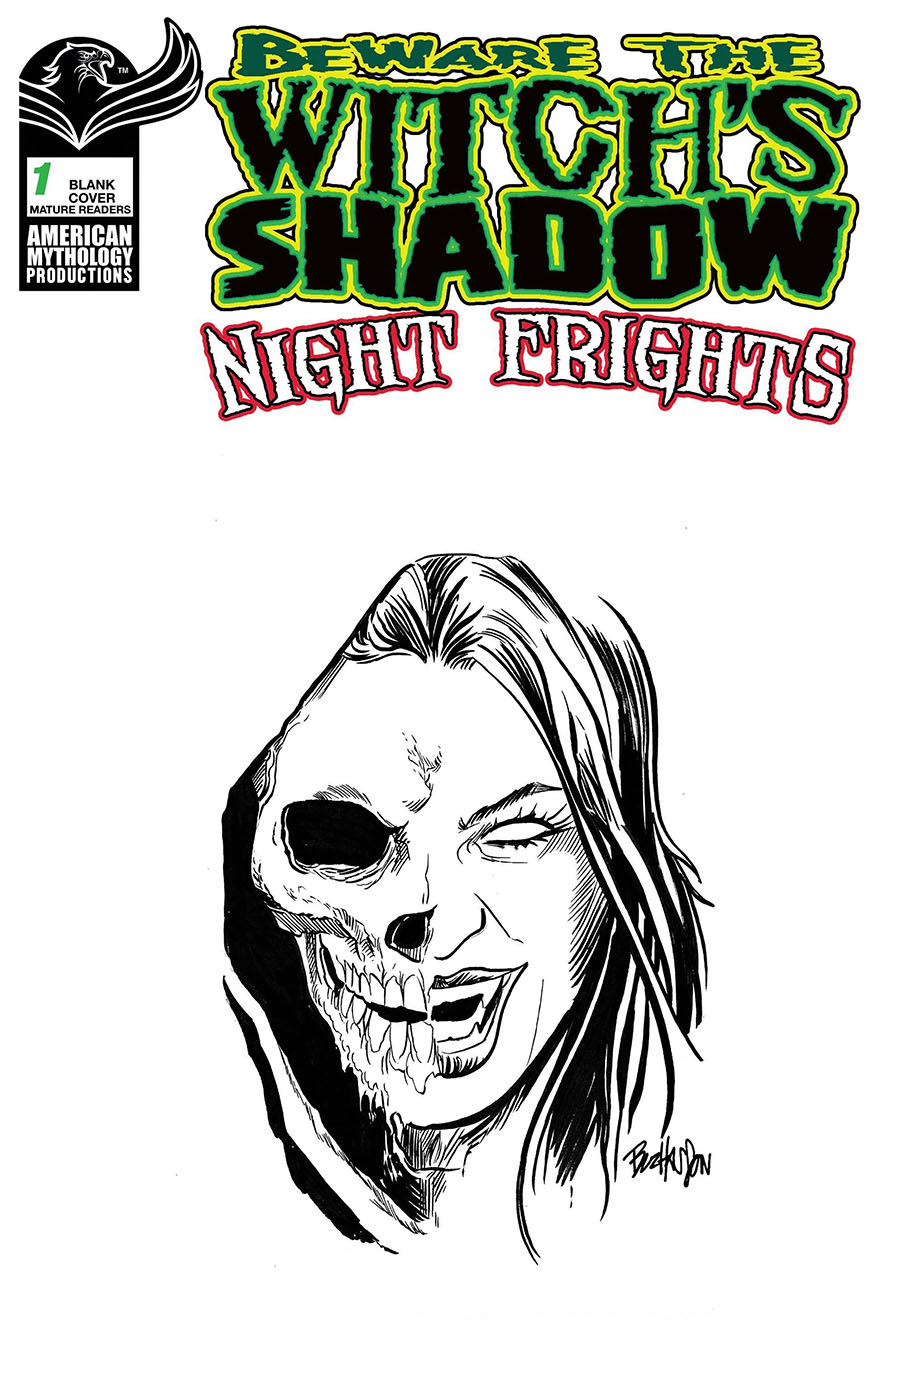 Beware The Witchs Shadow Night Frights #1 Cover F Buz Hasson Original Hand-Drawn Sketch Cover (Filled Randomly)